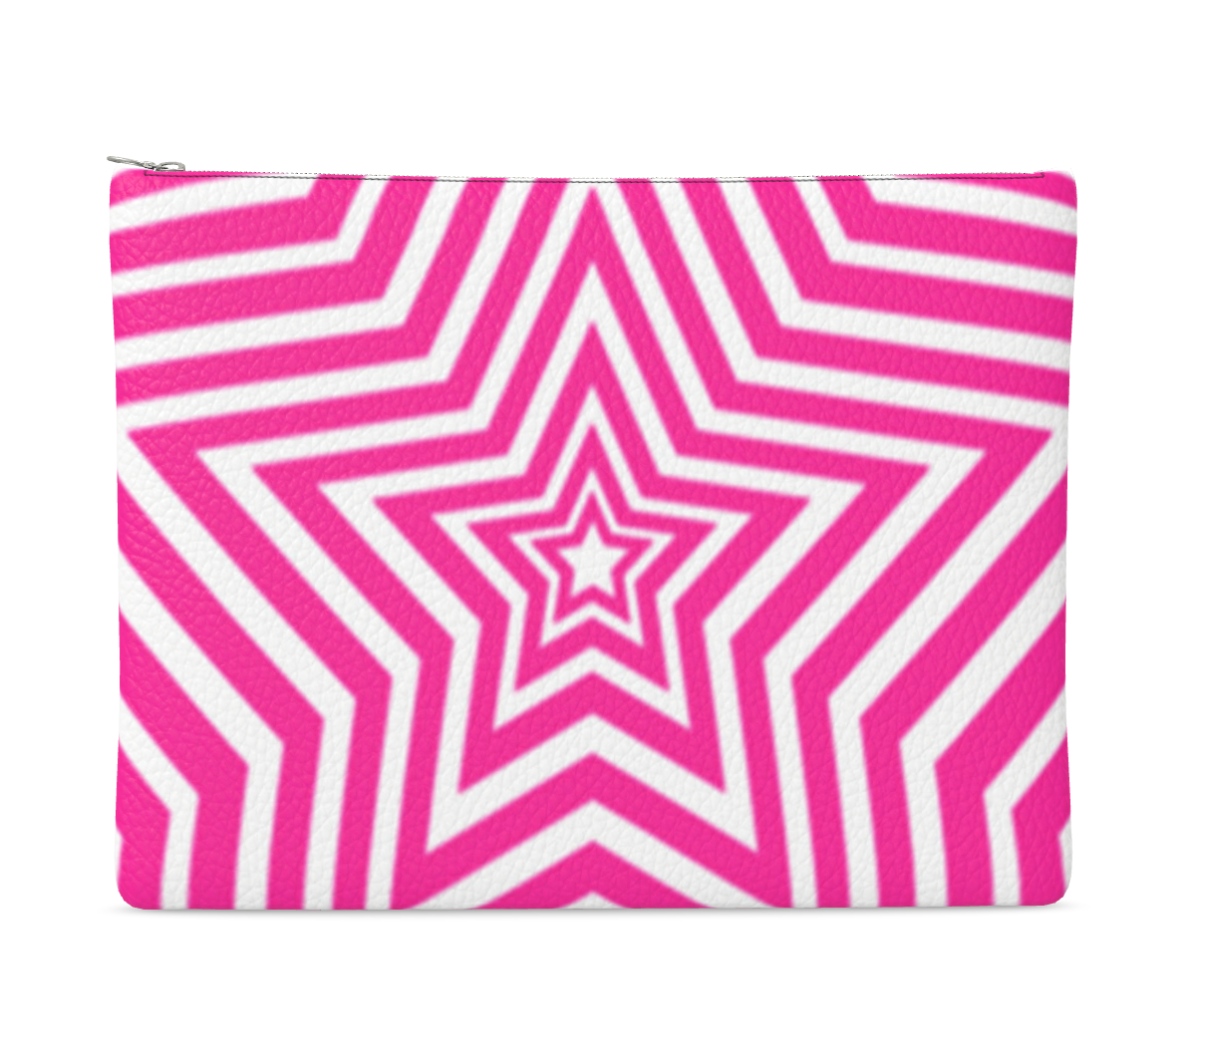 UNTITLED BOUTIQUE Pink and White Leather Star Clutch Bag - Limited Edition